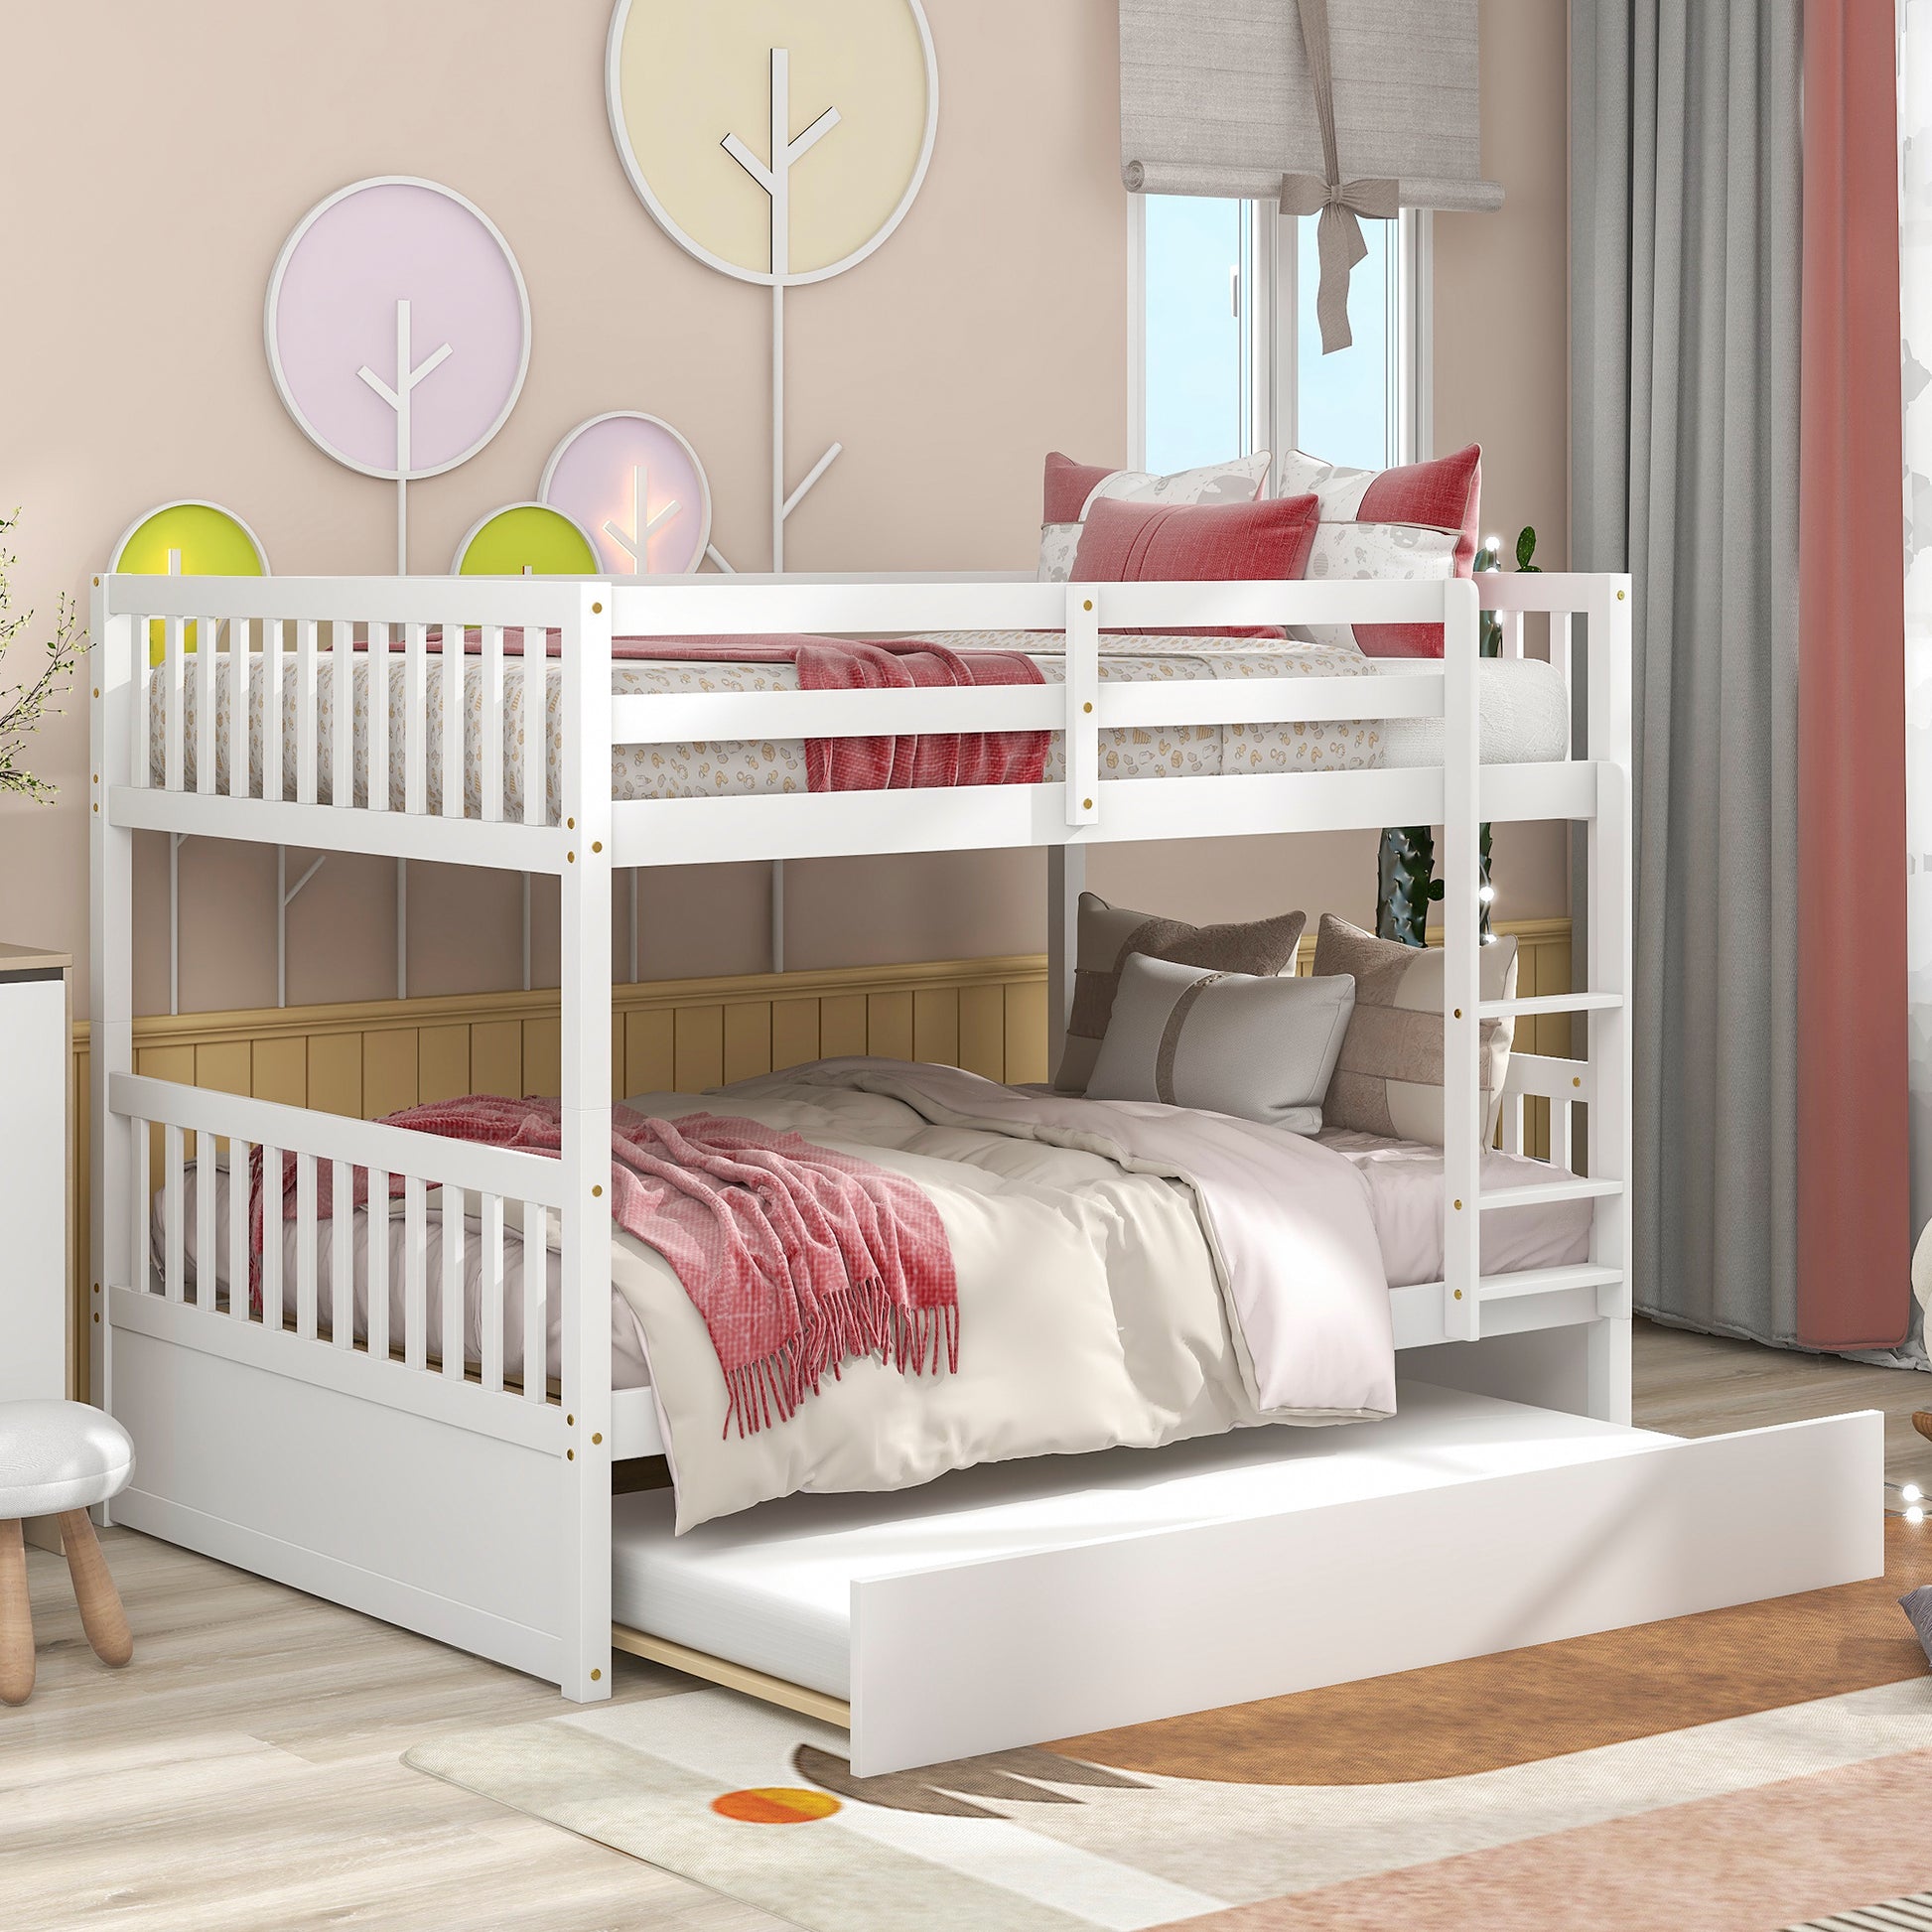 Inspirit Full over Full Convertible Bunk Bed with Trundle - White